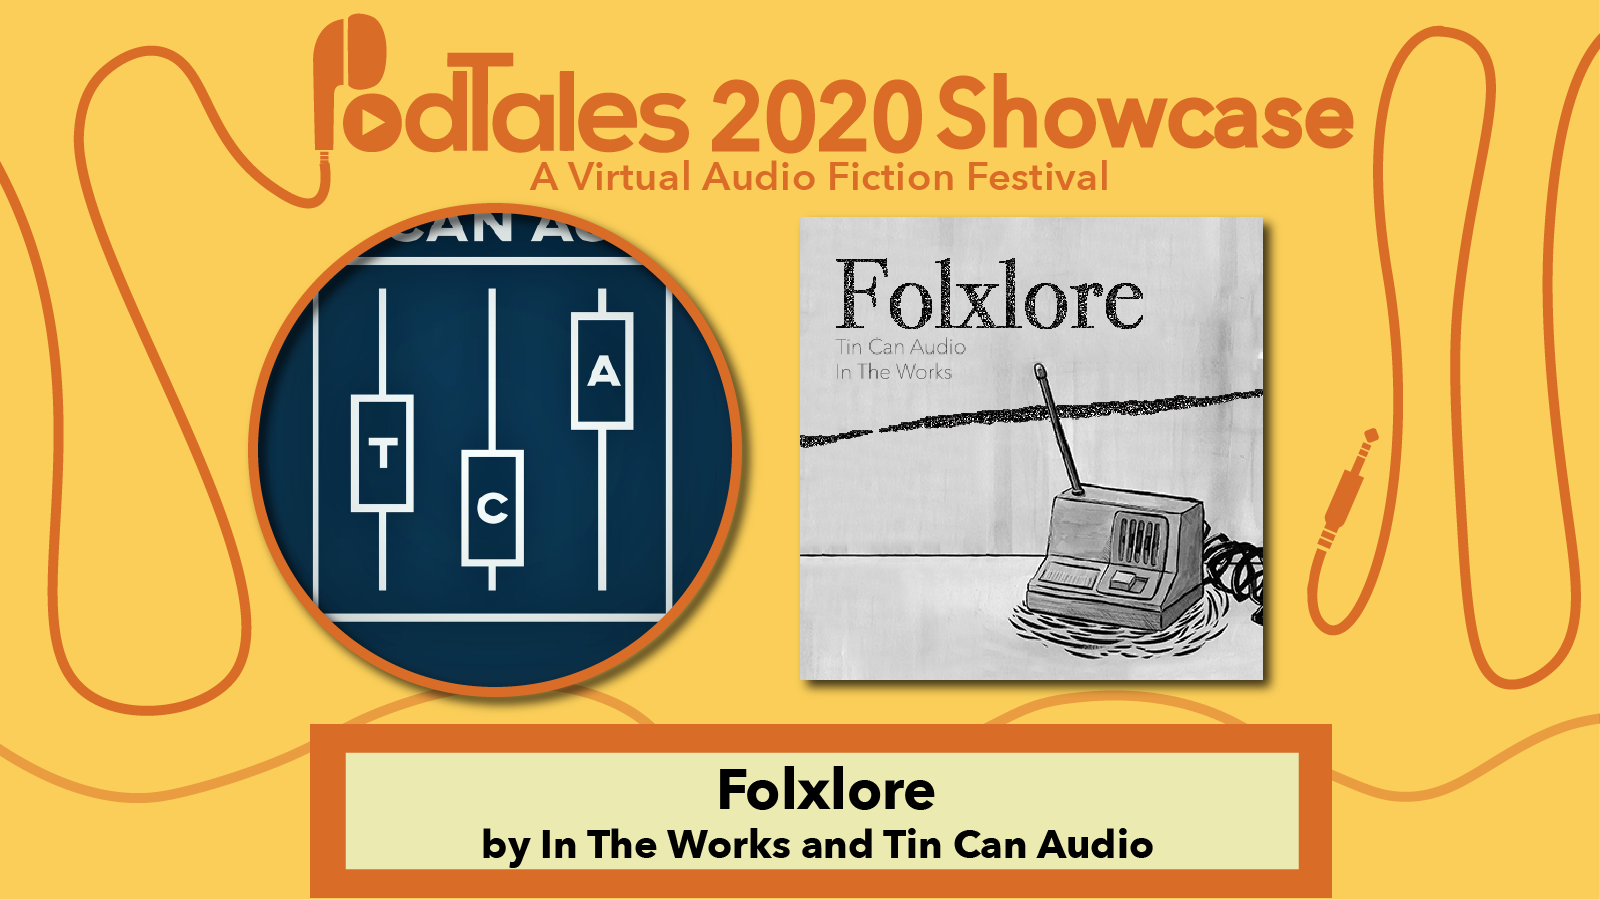 Text reading “PodTales 2020 Showcase: A Virtual Audio Fiction Festival”, Tin Can Audio Network Art, Show Art for Folxlore, Text reading “Folxlore by In the Works and Tin Can Audio”